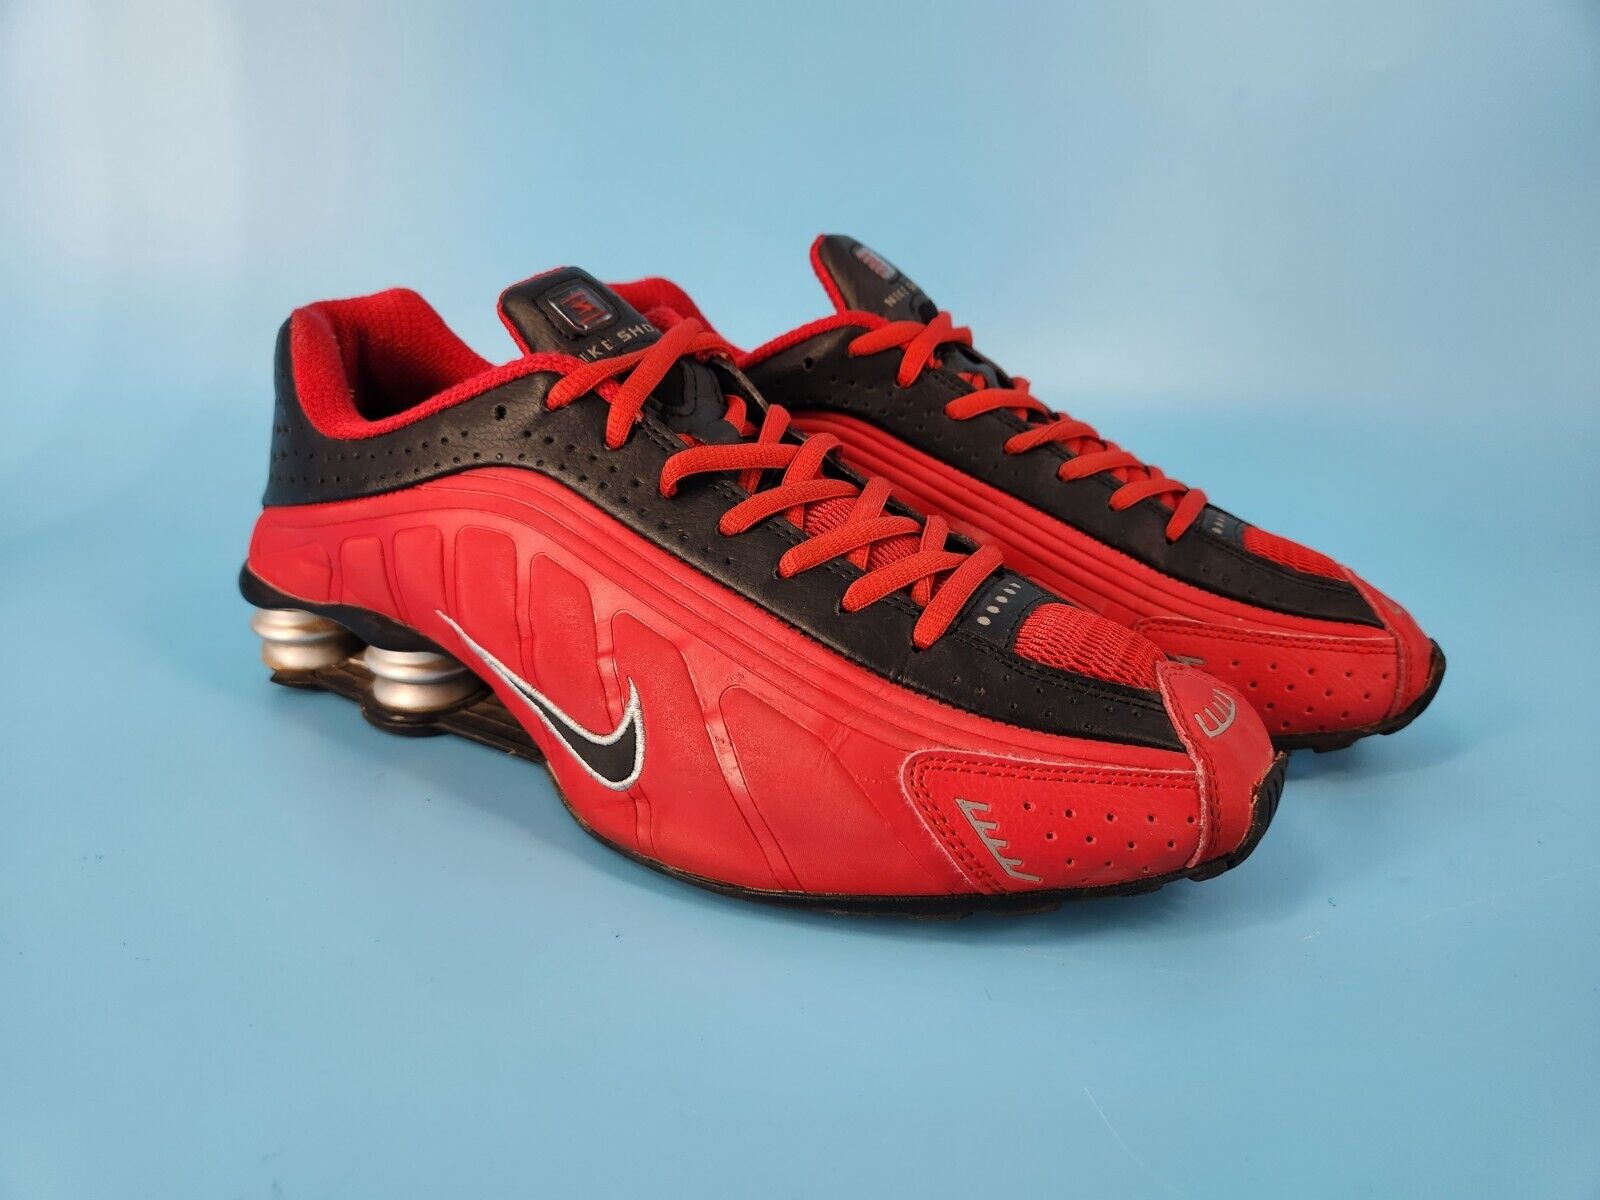 Shox R4 Red Running Shoes 104265-001 Mens Size 12 Rare | eBay